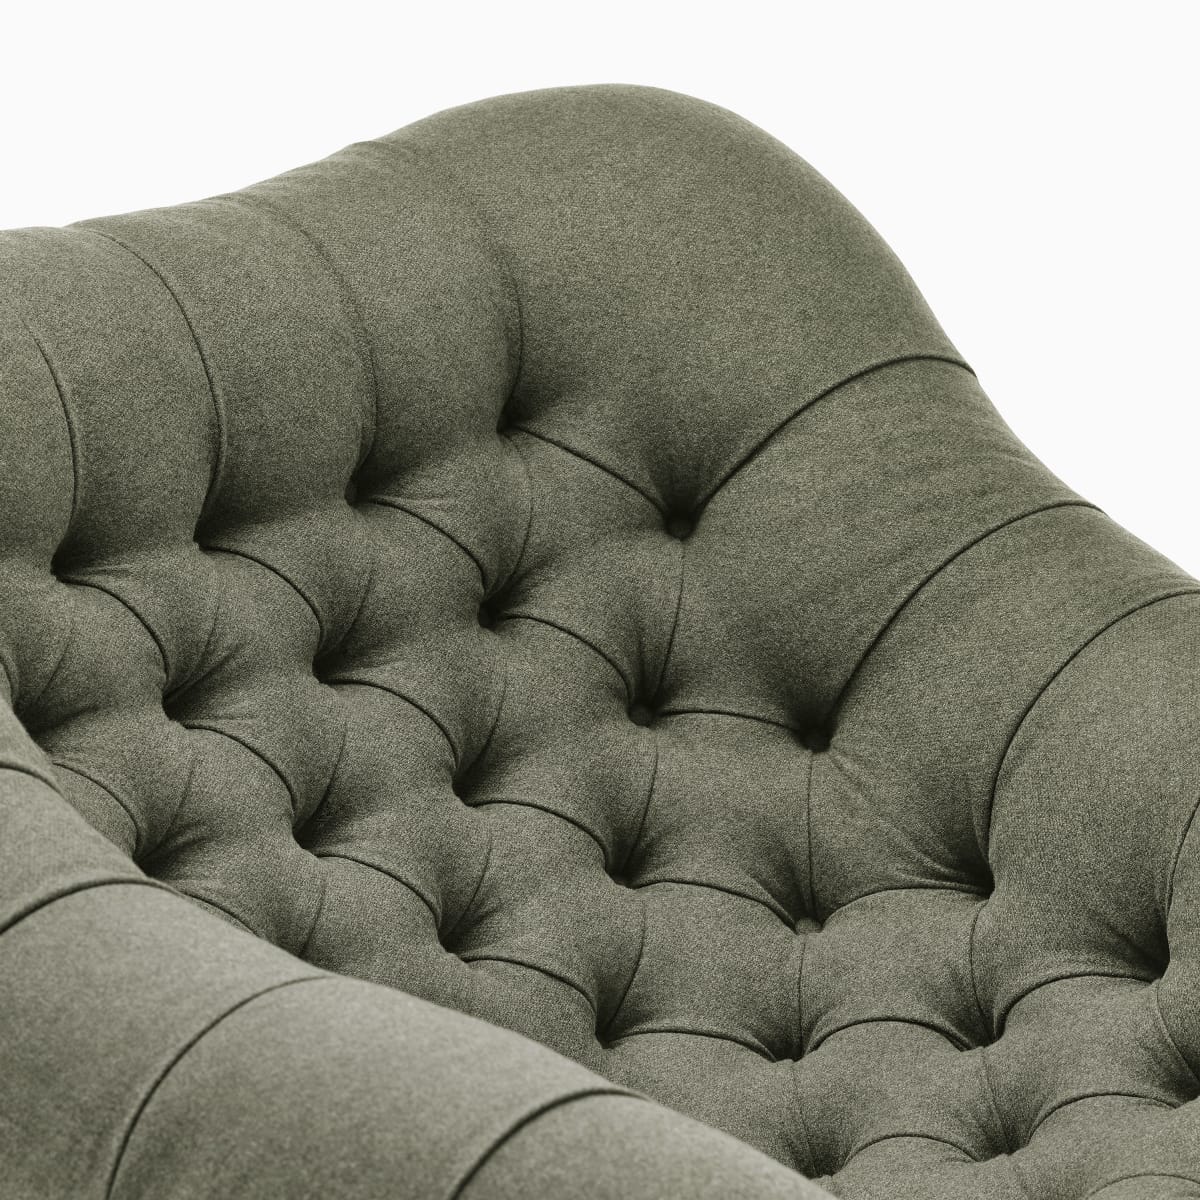 A close-up view of green fabric on a Rohde Easy Chair.